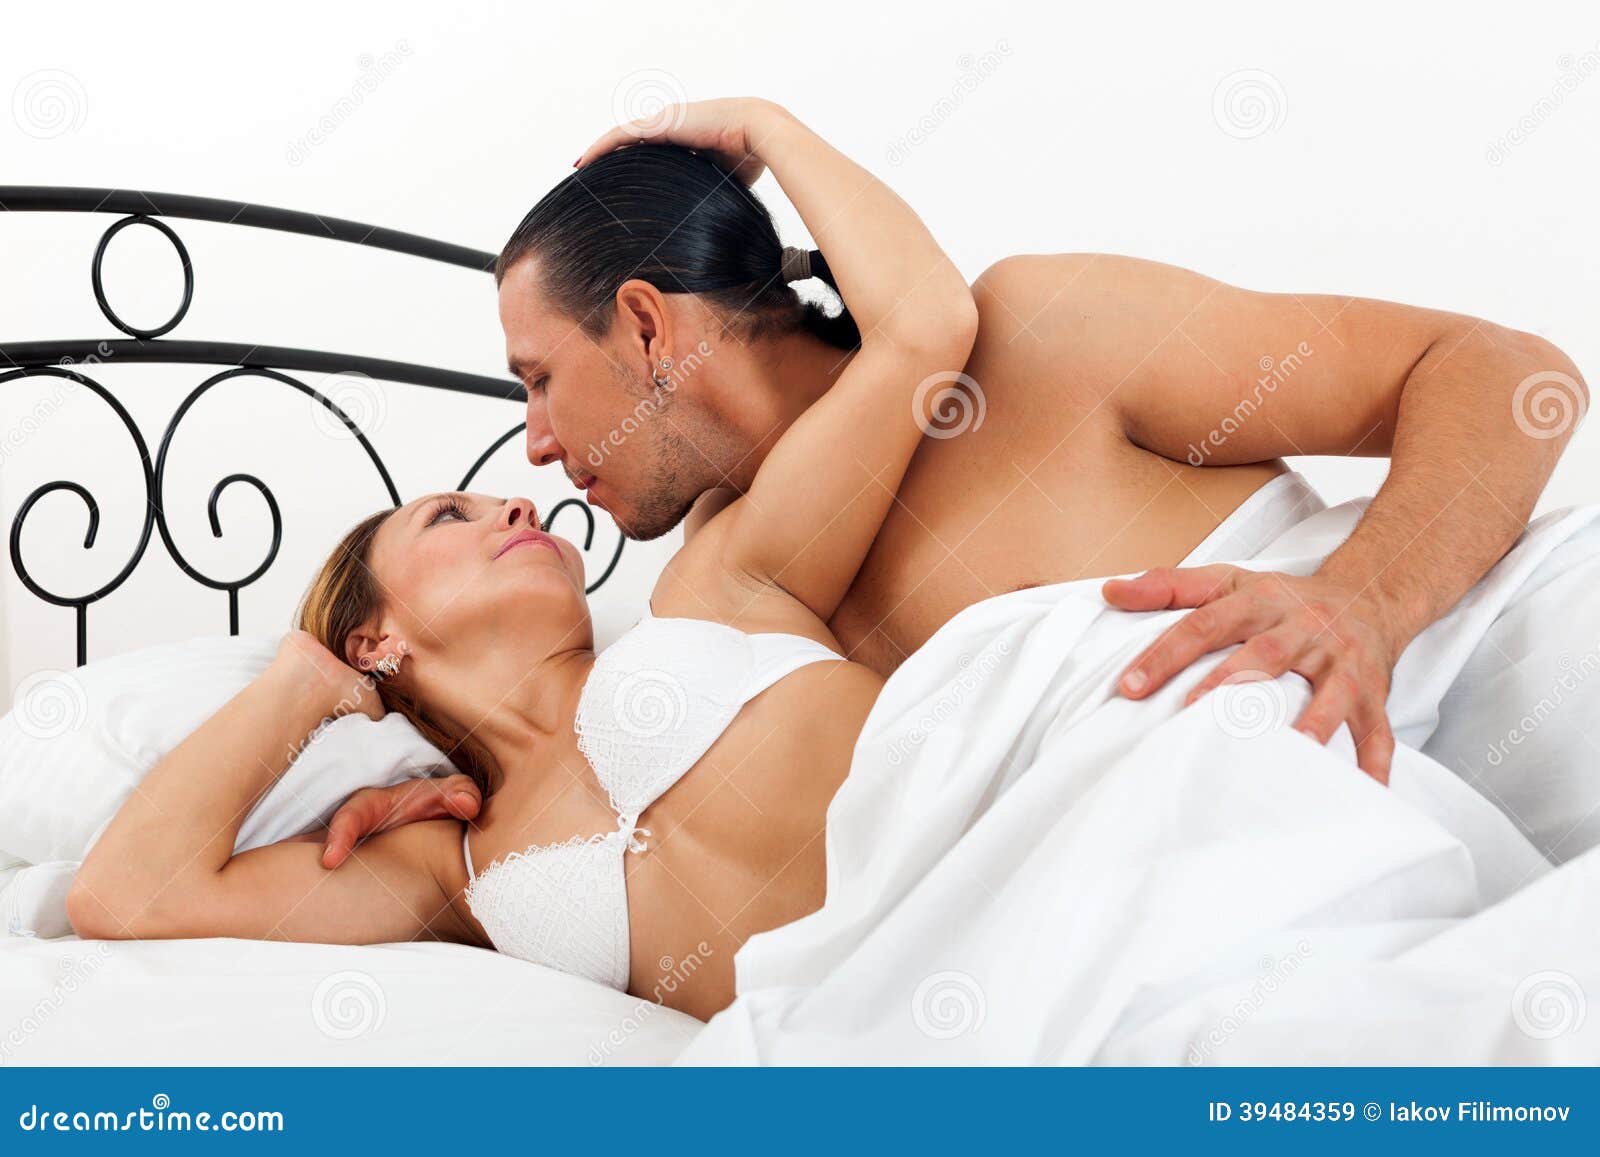 Adult Couple Having Sex on Bed Stock Image